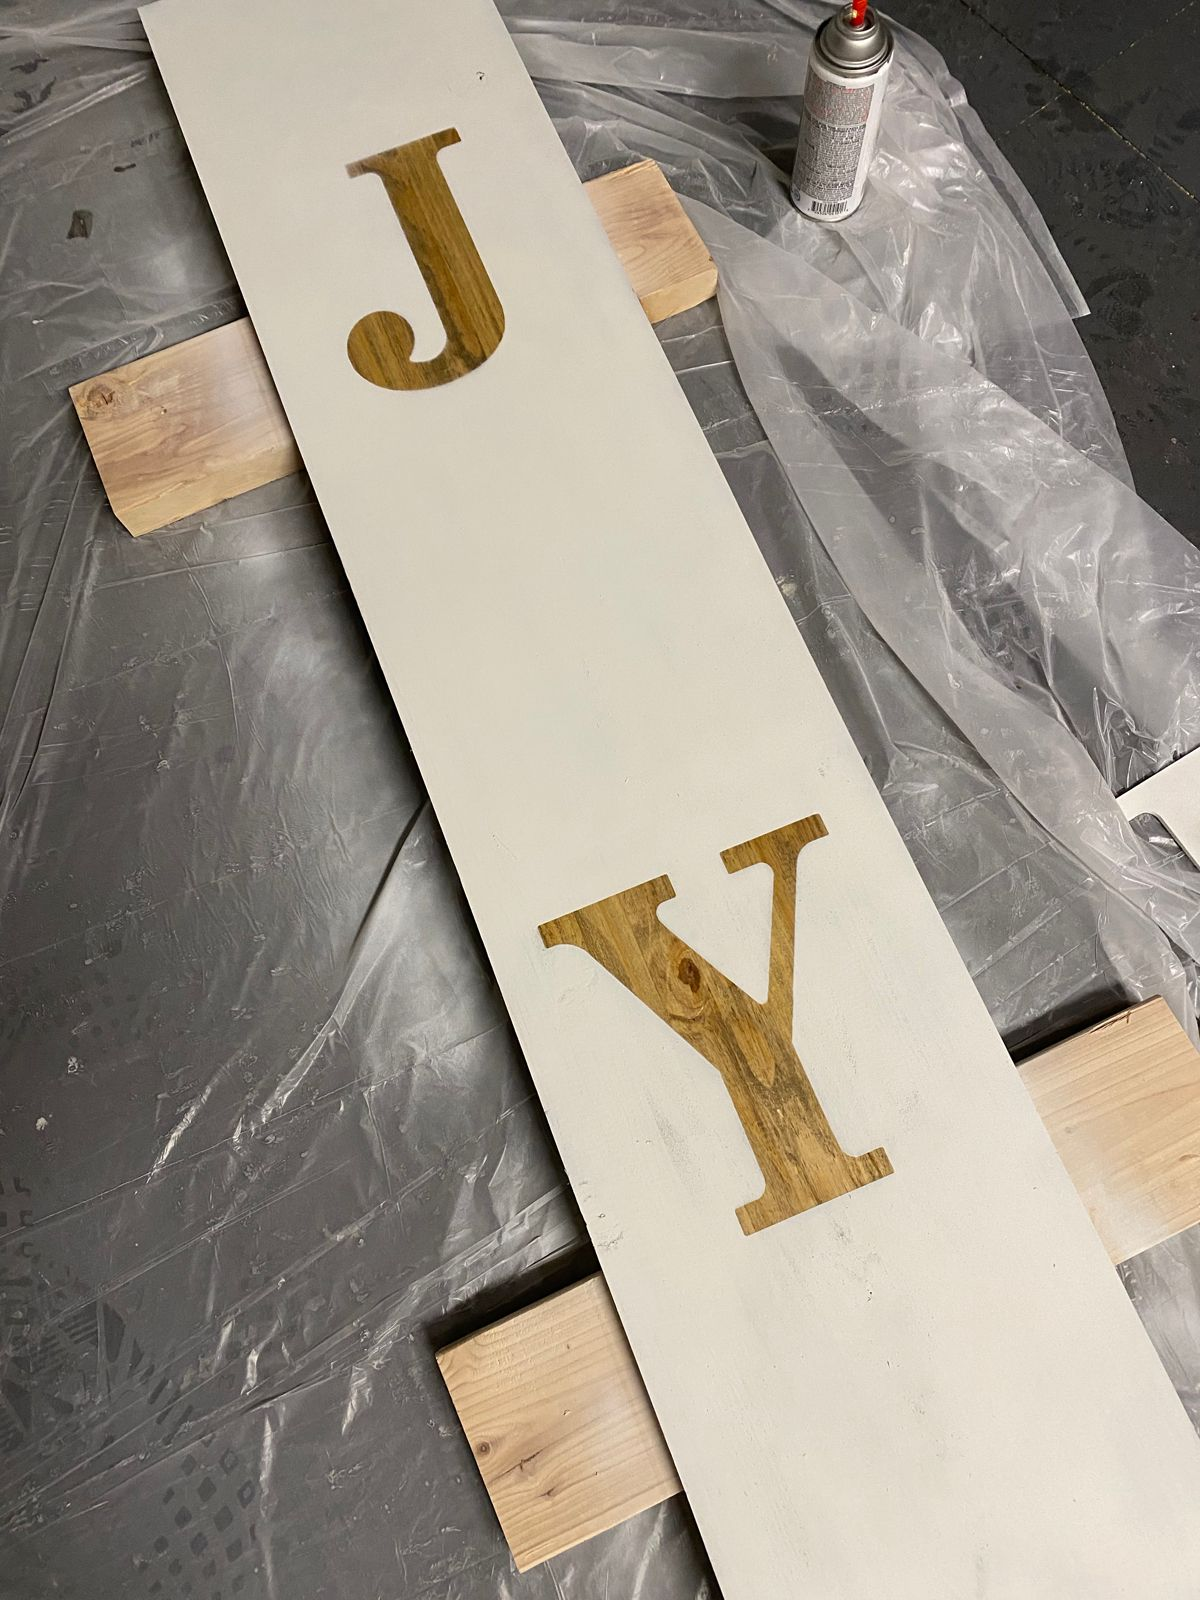 DIY WOODEN LETTERS SIGNAGE - perfect for small time business owners ch